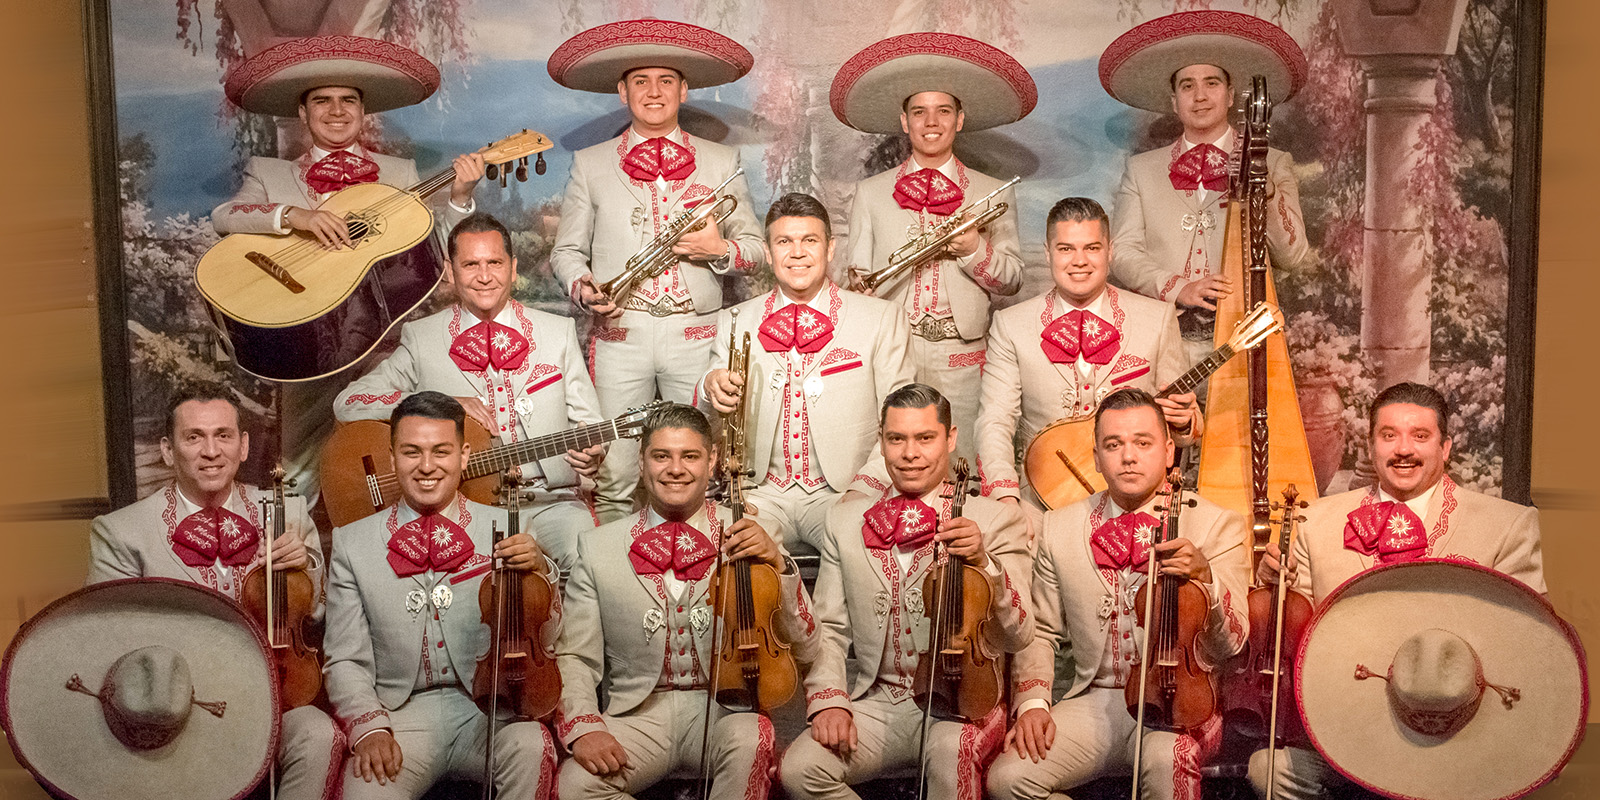 Men in traditional mariachi dress sit in front of a colorful backdrop holding instruments.